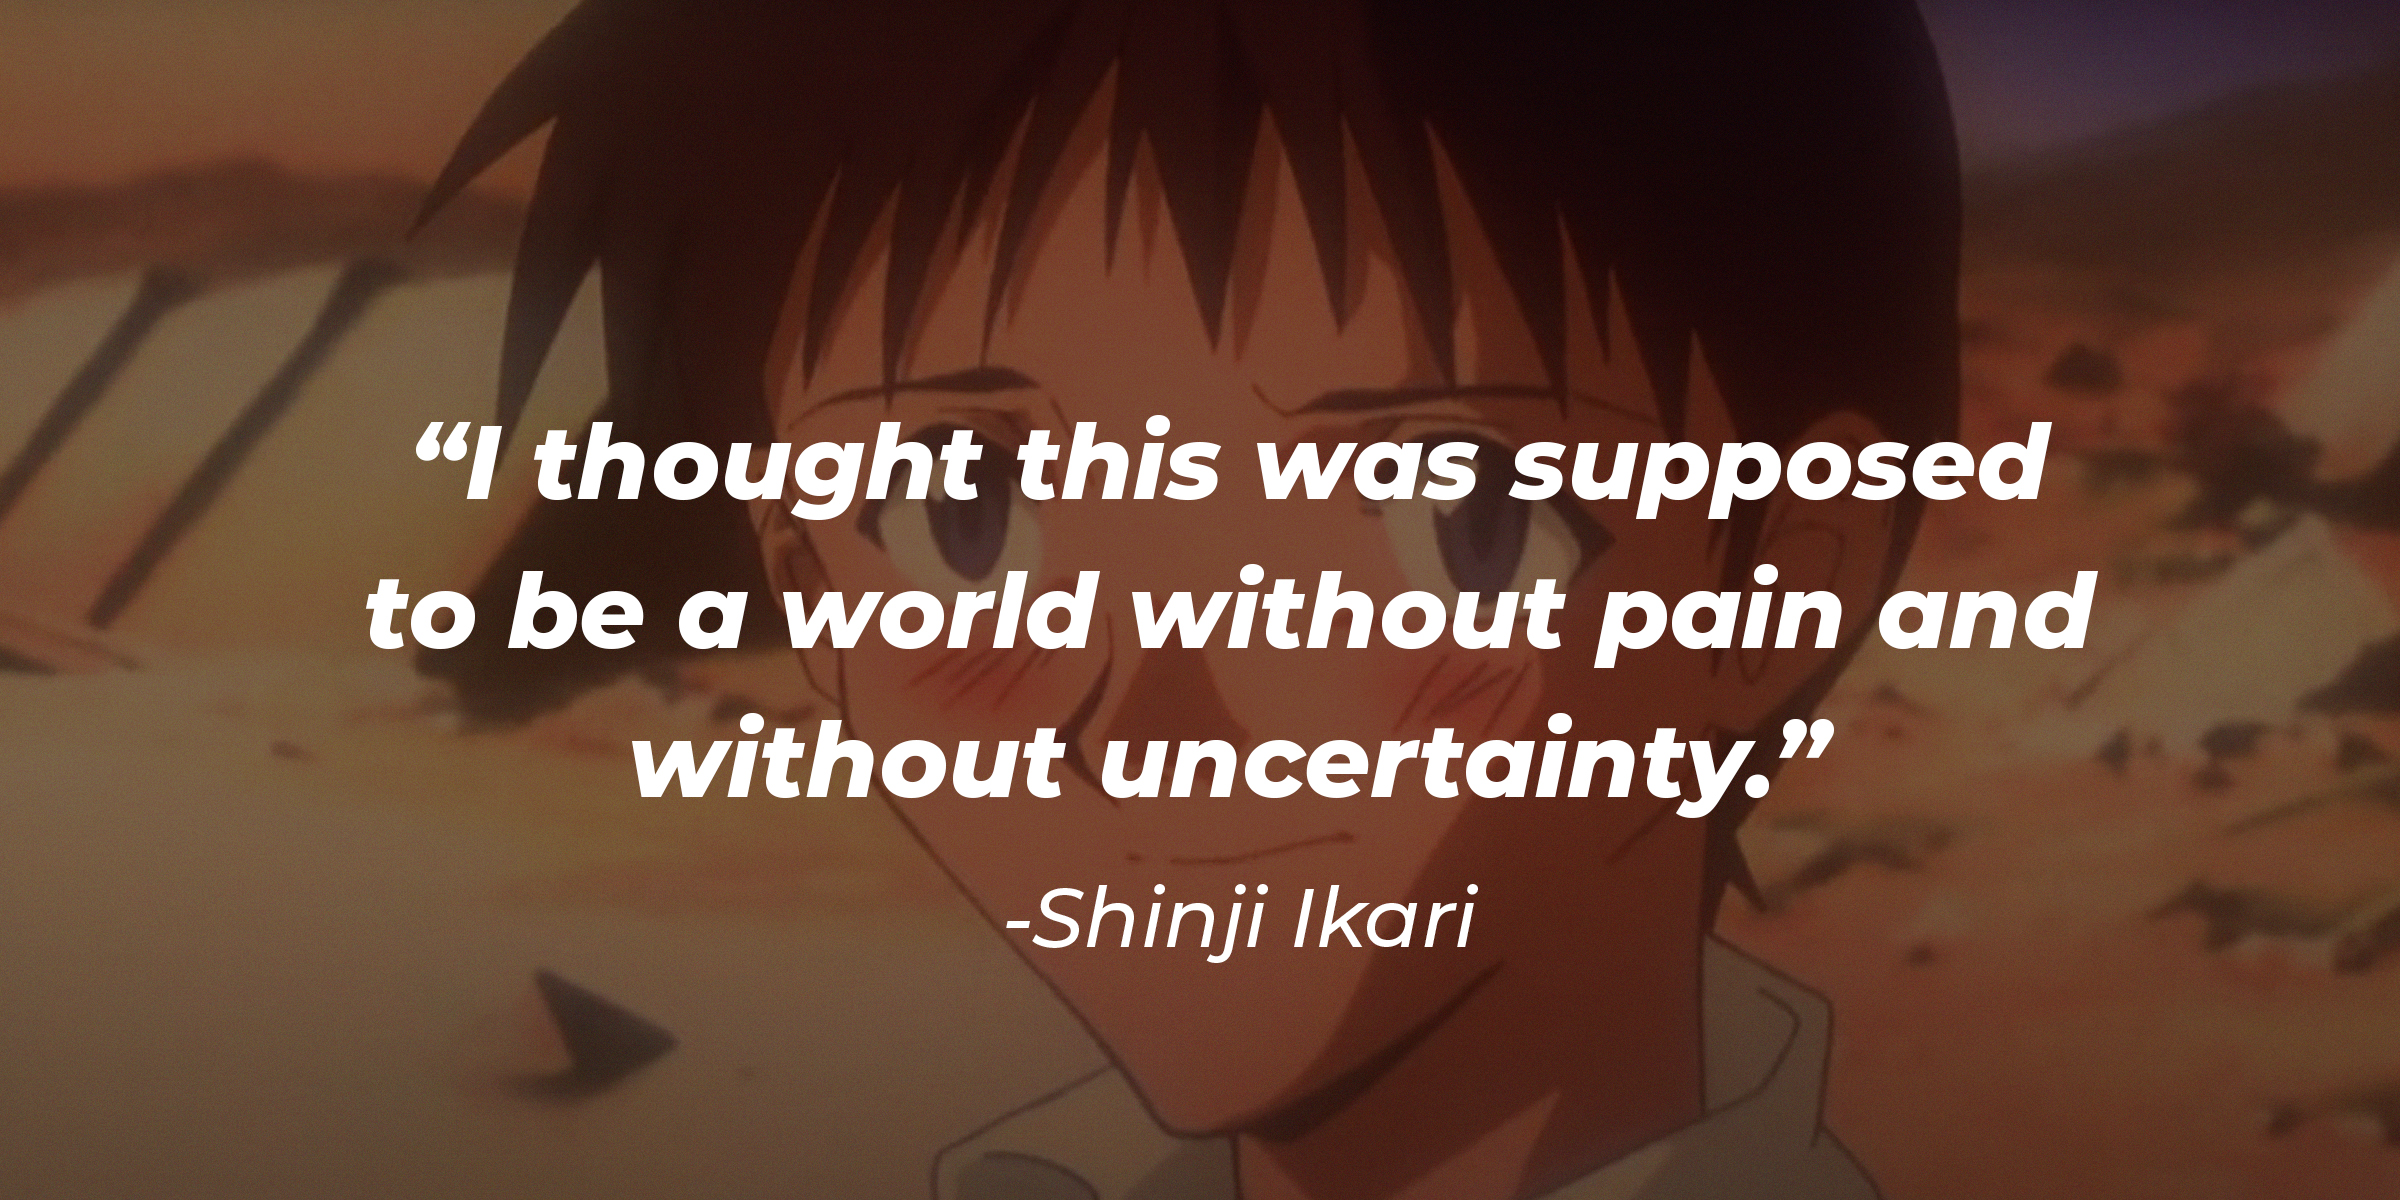 An image of Shinji Ikari with his quote: “I thought this was supposed to be a world without pain and without uncertainty.” | Source: youtube.com/CrunchyrollCollection